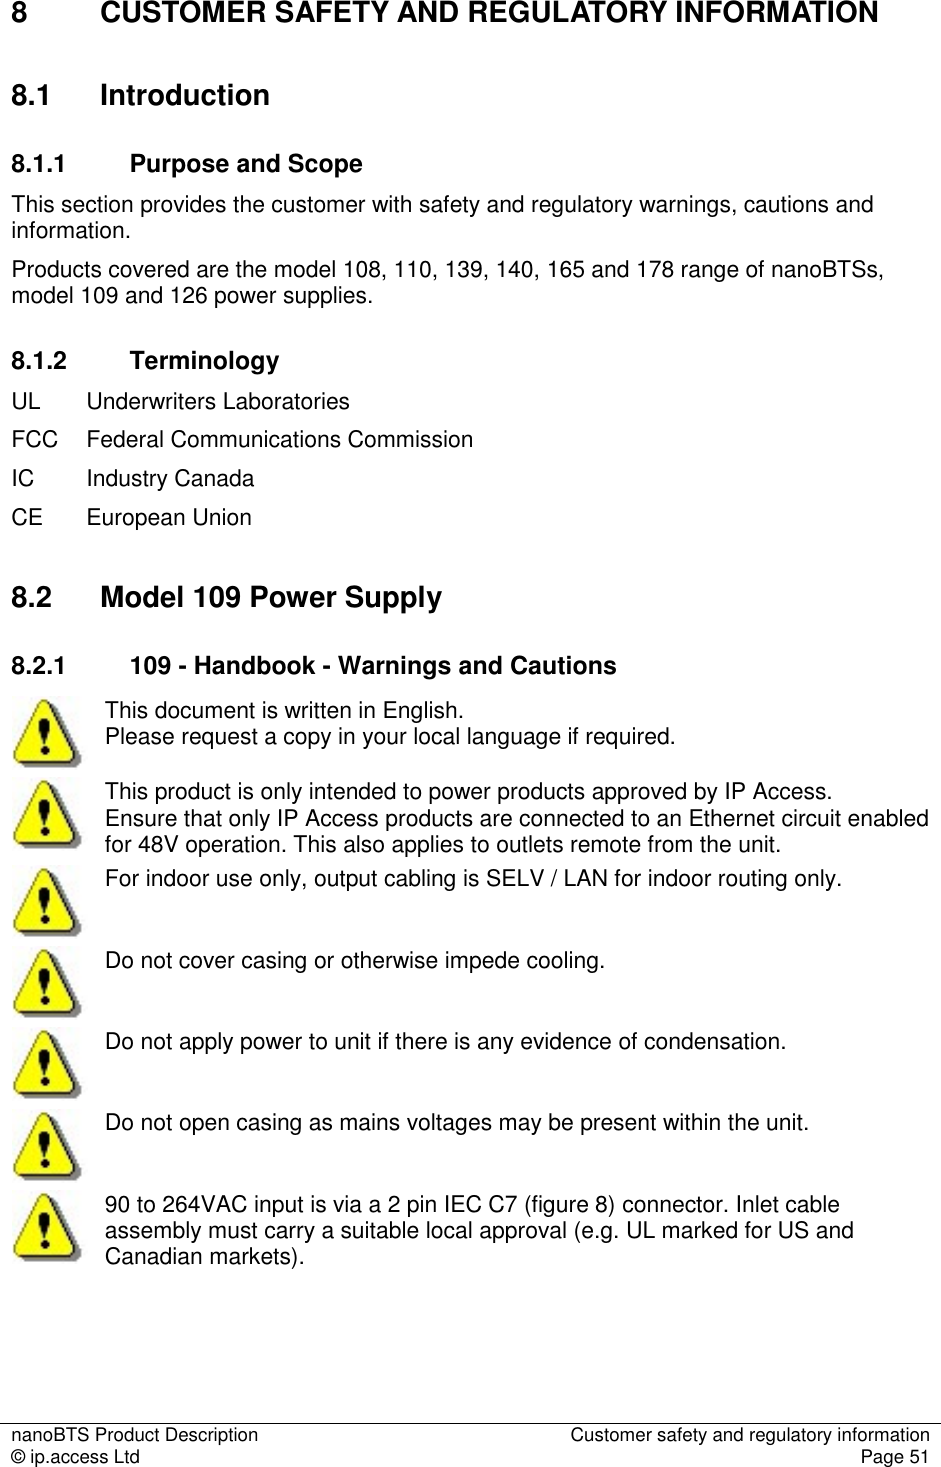 nanoBTS Product Description  Customer safety and regulatory information © ip.access Ltd  Page 51  8  CUSTOMER SAFETY AND REGULATORY INFORMATION 8.1  Introduction 8.1.1  Purpose and Scope This section provides the customer with safety and regulatory warnings, cautions and information. Products covered are the model 108, 110, 139, 140, 165 and 178 range of nanoBTSs, model 109 and 126 power supplies. 8.1.2  Terminology UL   Underwriters Laboratories  FCC  Federal Communications Commission IC  Industry Canada CE  European Union 8.2  Model 109 Power Supply 8.2.1  109 - Handbook - Warnings and Cautions  This document is written in English.  Please request a copy in your local language if required.  This product is only intended to power products approved by IP Access.  Ensure that only IP Access products are connected to an Ethernet circuit enabled for 48V operation. This also applies to outlets remote from the unit.  For indoor use only, output cabling is SELV / LAN for indoor routing only.  Do not cover casing or otherwise impede cooling.  Do not apply power to unit if there is any evidence of condensation.  Do not open casing as mains voltages may be present within the unit.  90 to 264VAC input is via a 2 pin IEC C7 (figure 8) connector. Inlet cable assembly must carry a suitable local approval (e.g. UL marked for US and Canadian markets).  